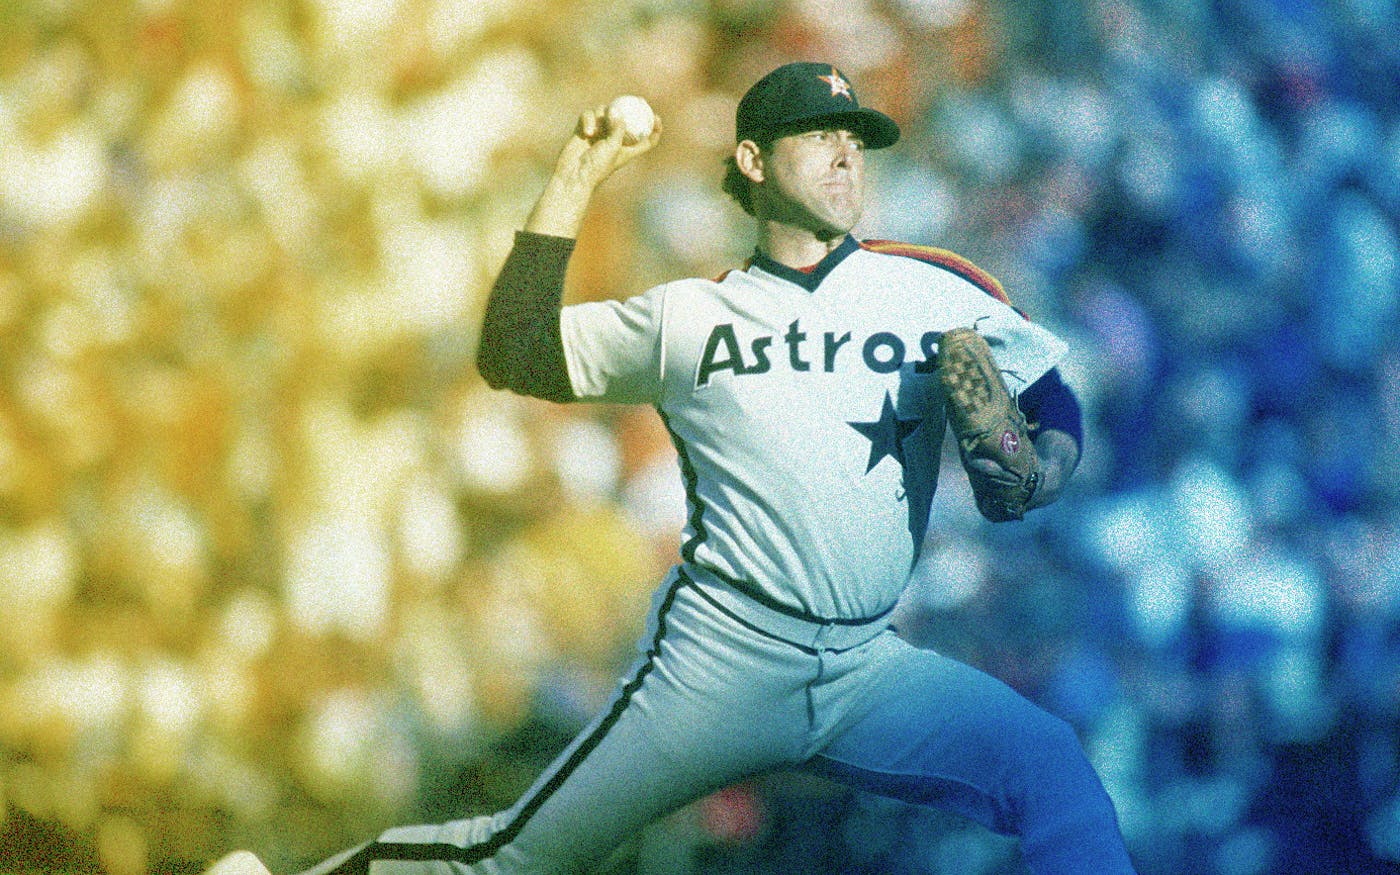 Nolan Ryan: “Why Wouldn't an Athlete Want to Be a Positive Role